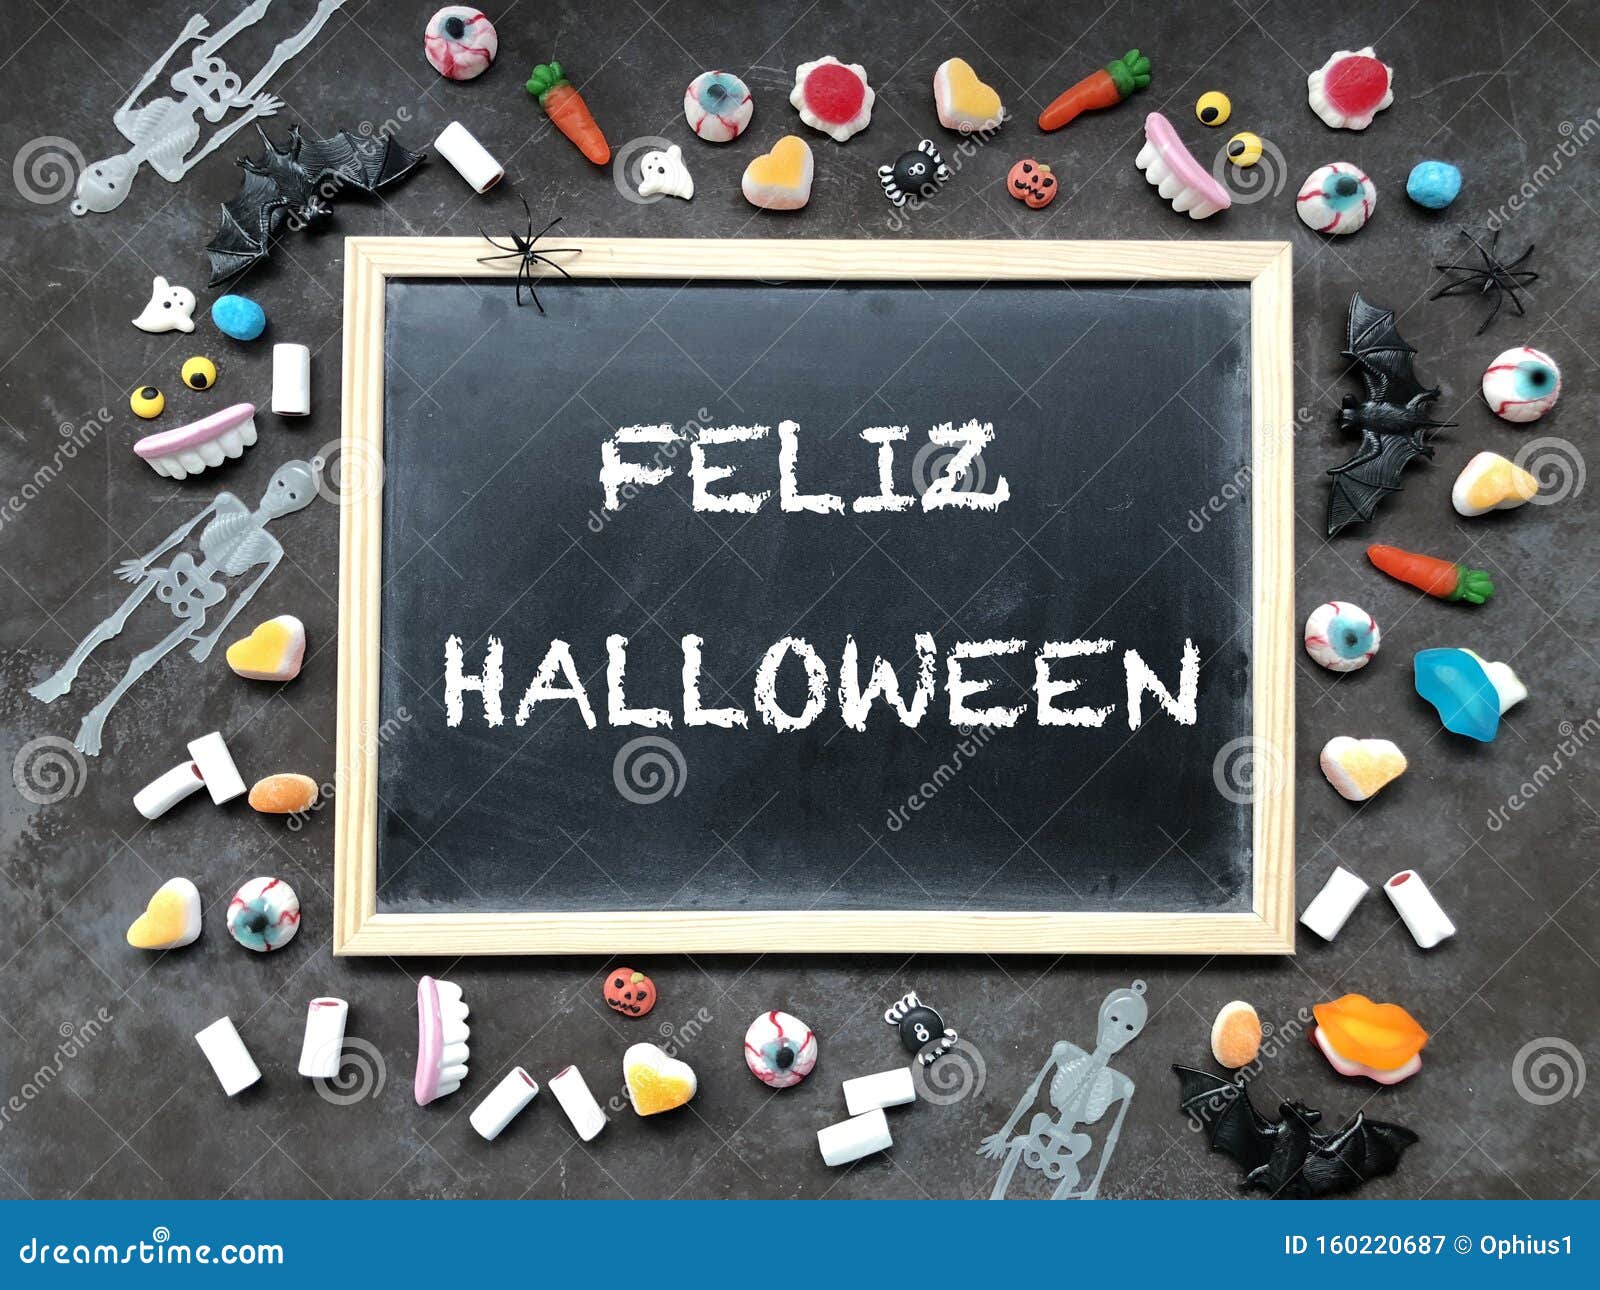 Happy Halloween Text in Spanish. Candy Flat Lay and Blackboard on Textured Dark Background Stock Image - Image of panoramic, holding: 160220687